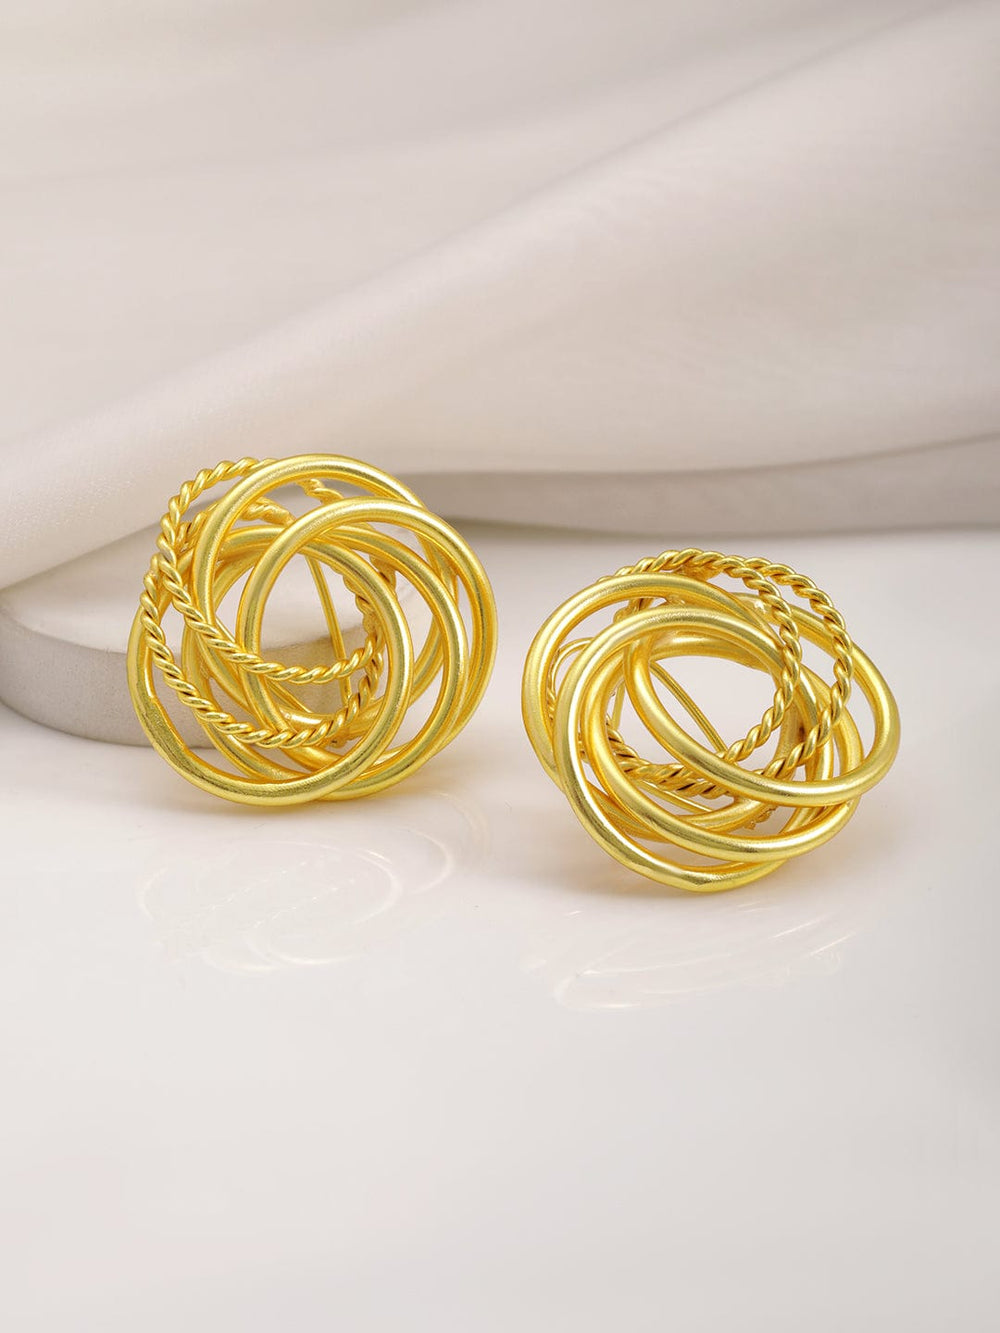 22KT Gold Plated Wired  Floral Studs Earrings Earrings